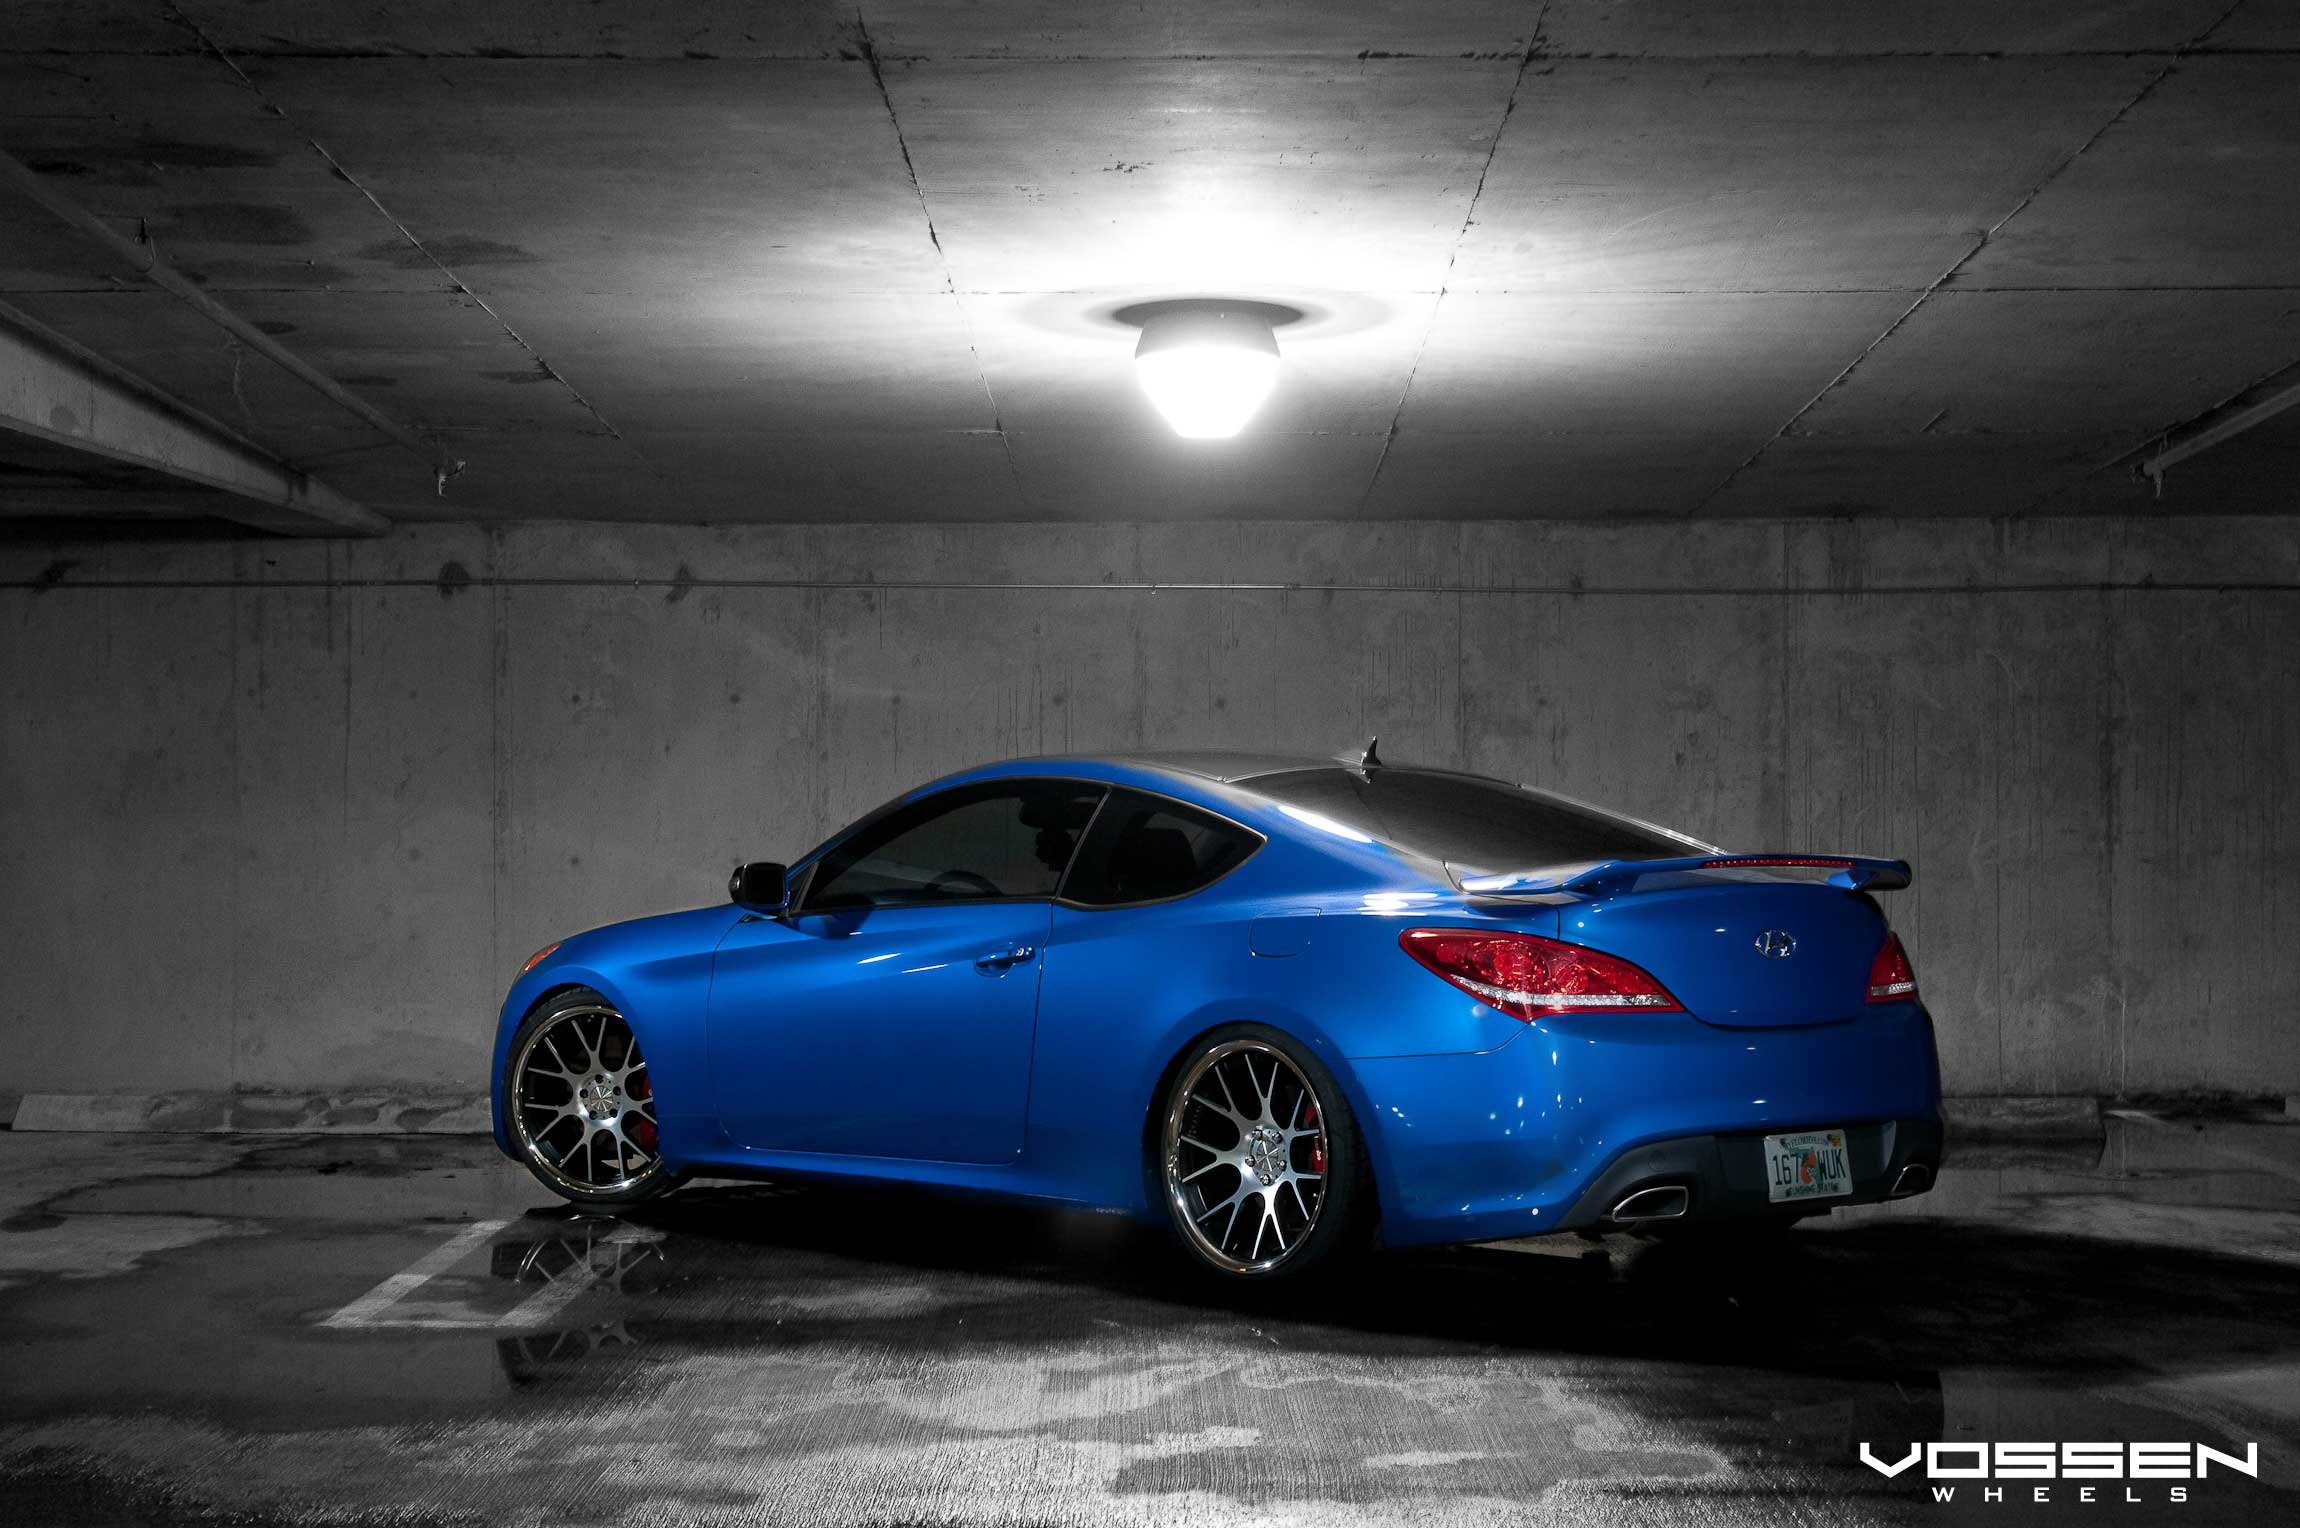 Rear Spoiler with Light on Blue Hyundai Genesis Coupe - Photo by Vossen